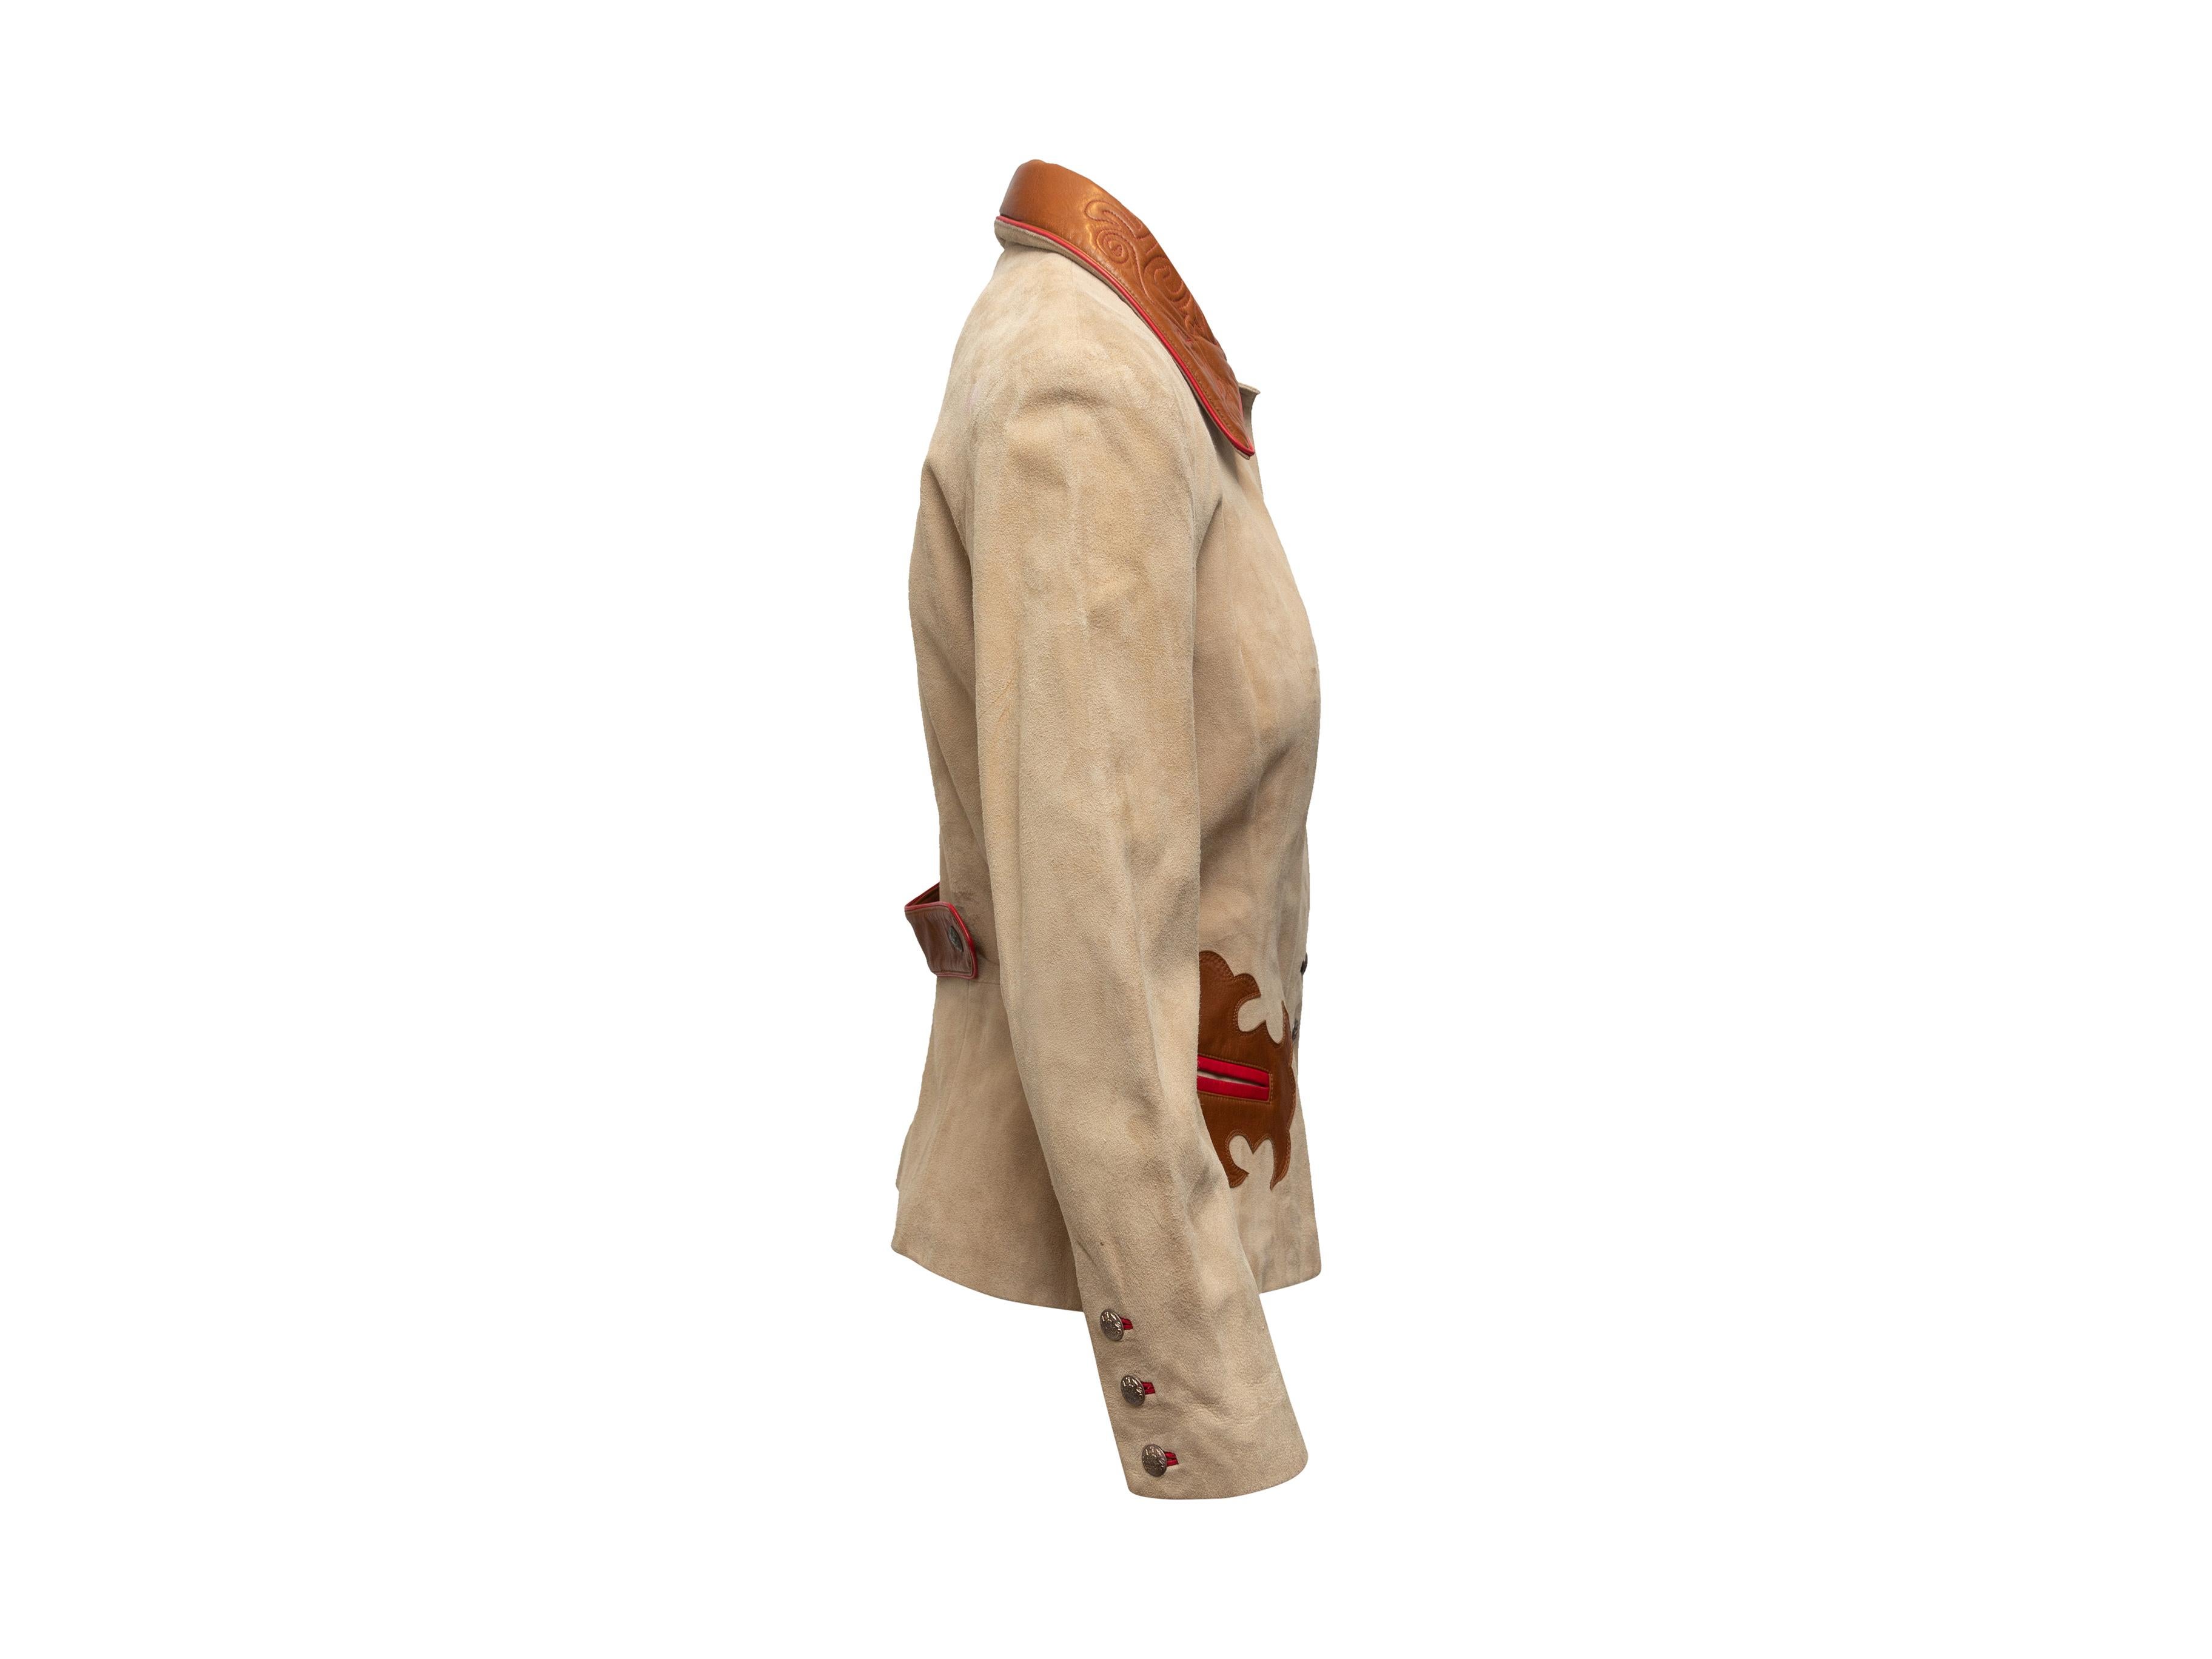 Product details: Vintage tan suede and brown leather western jacket by John Michael. Pointed collar featuring embroidery. Dual welt pockets at hips. Button closures at front. 19